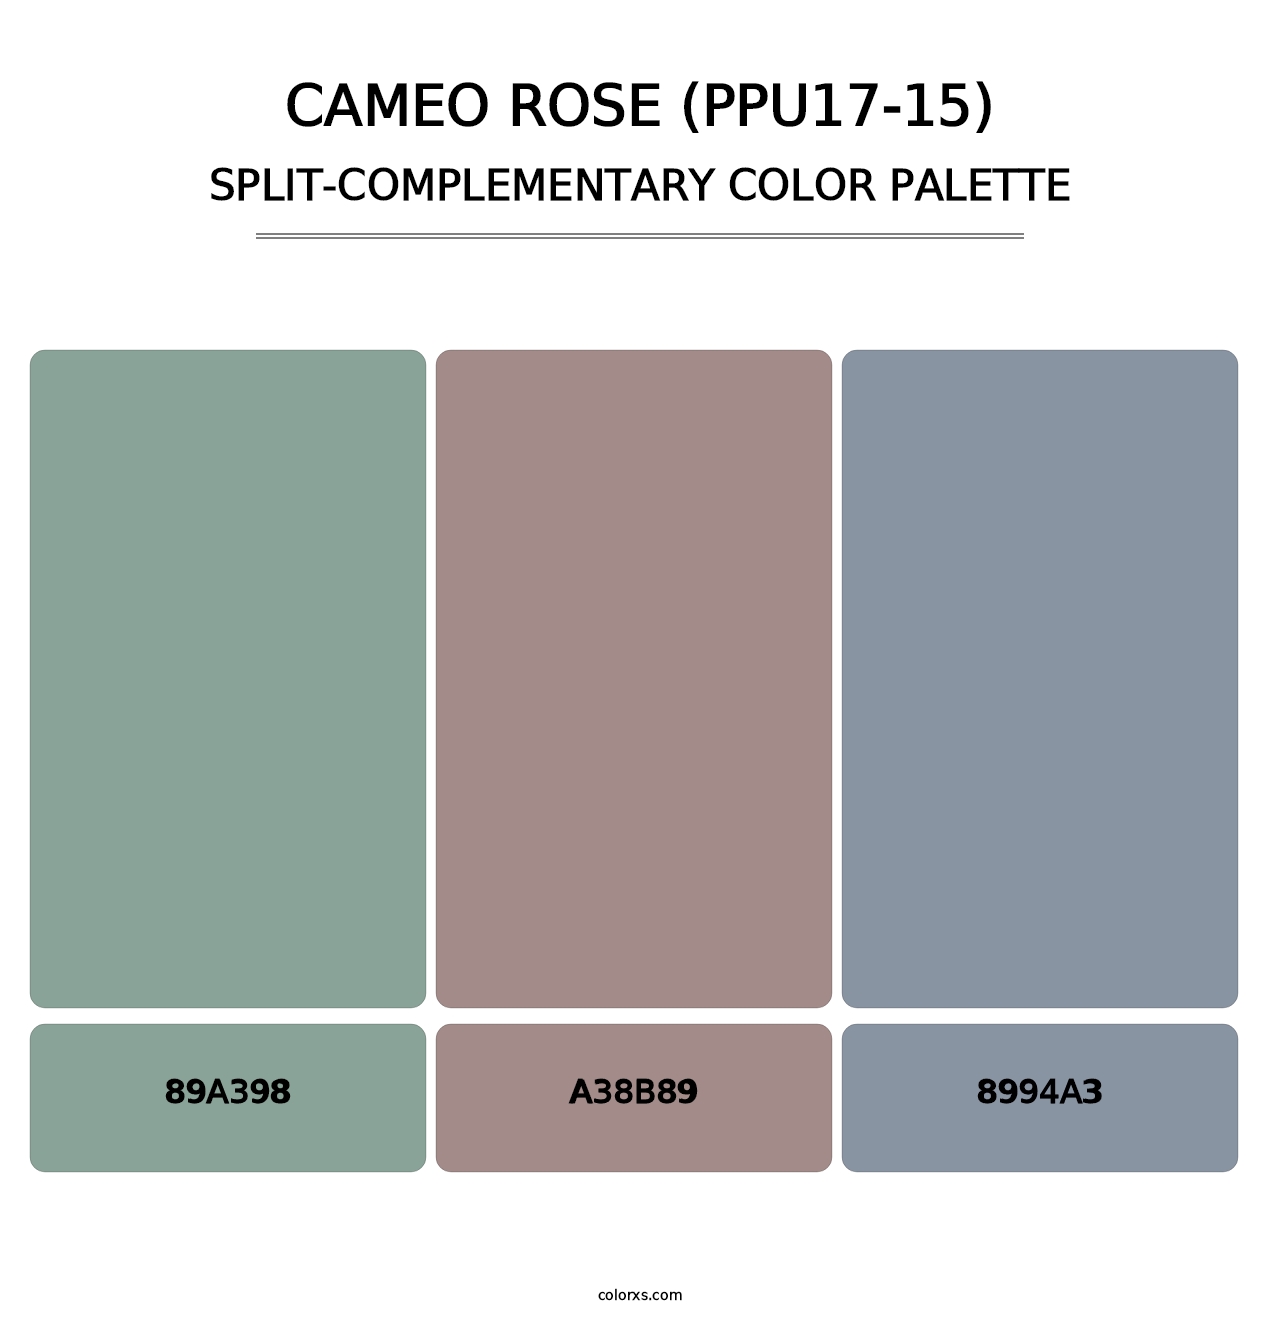 Cameo Rose (PPU17-15) - Split-Complementary Color Palette